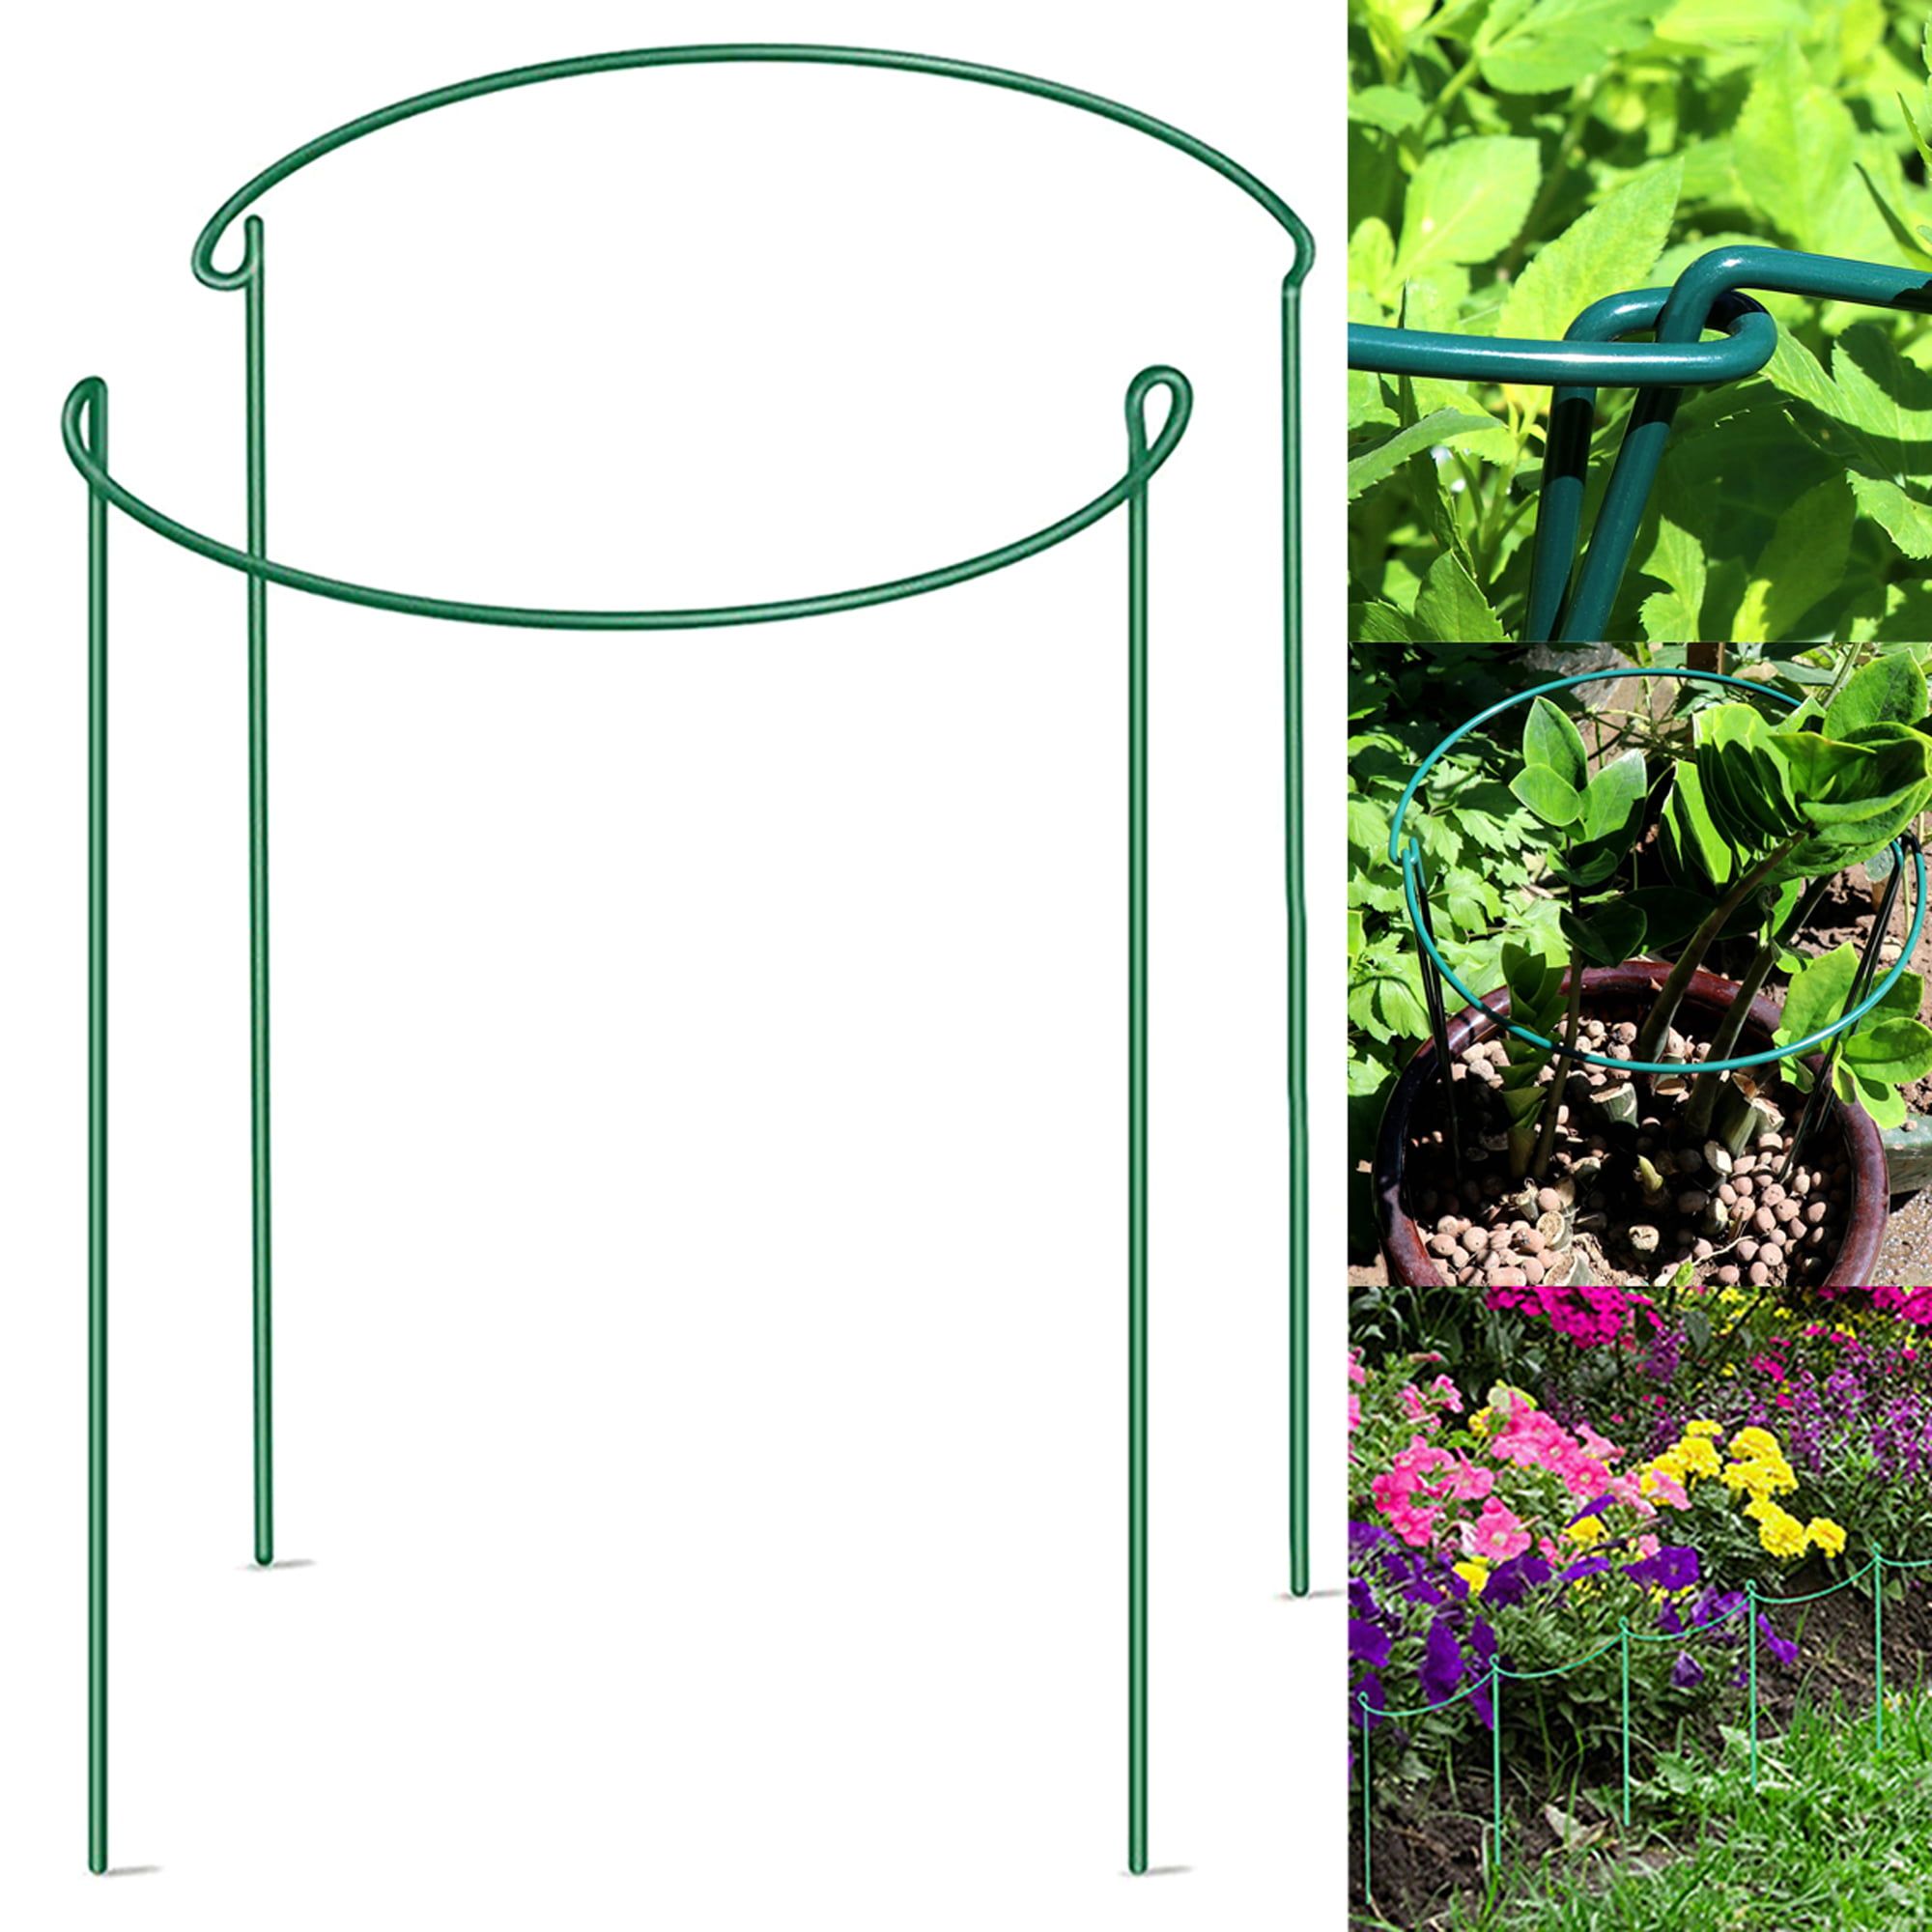 Pack of 4 x 120cm U Shaped Metal Natural Rust Garden Hoops Plant Support Frame 